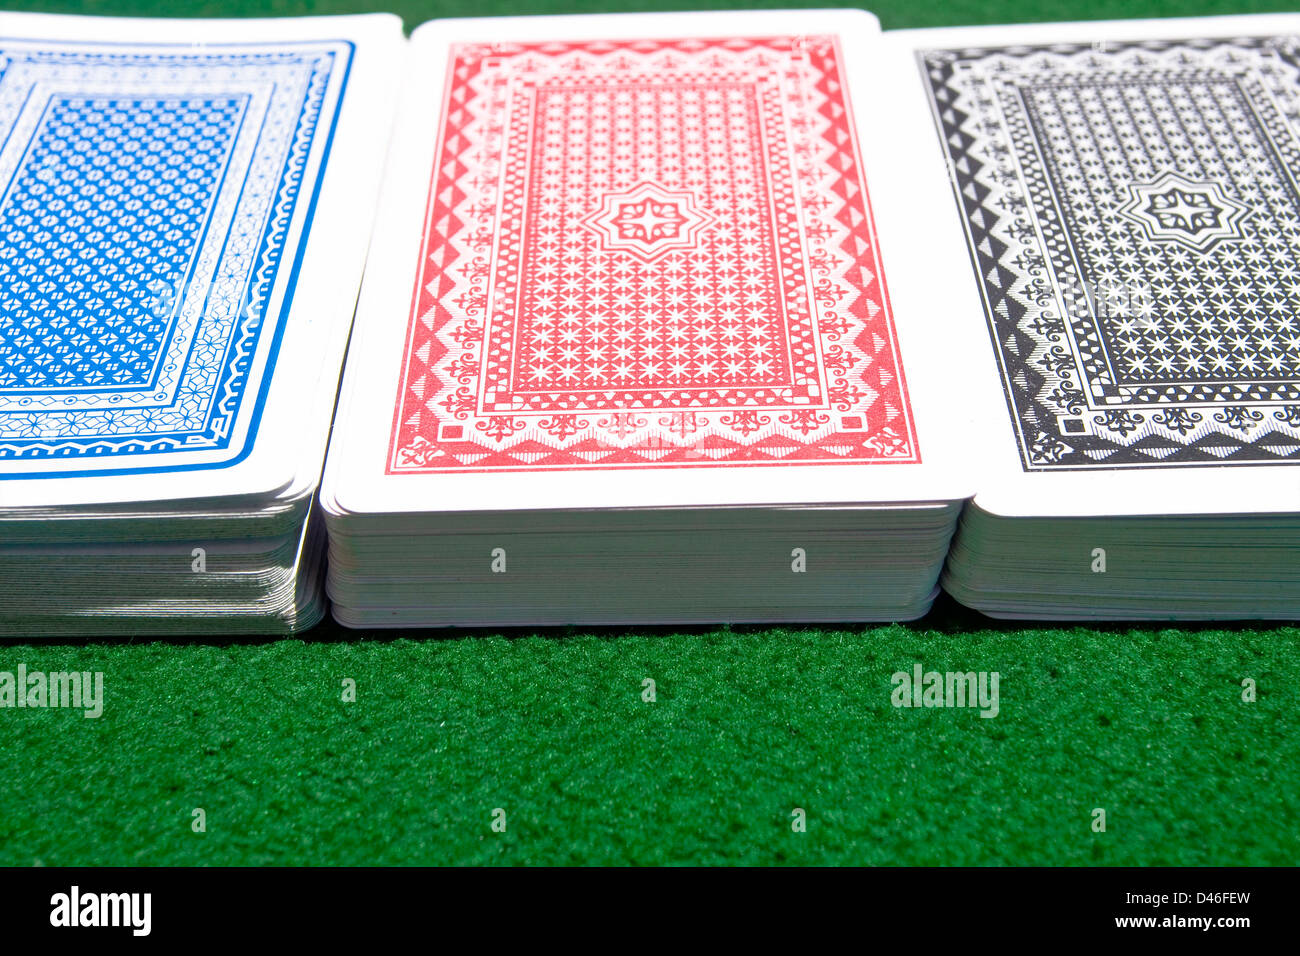 Three different-color decks of playing cards on the green playing table. Stock Photo